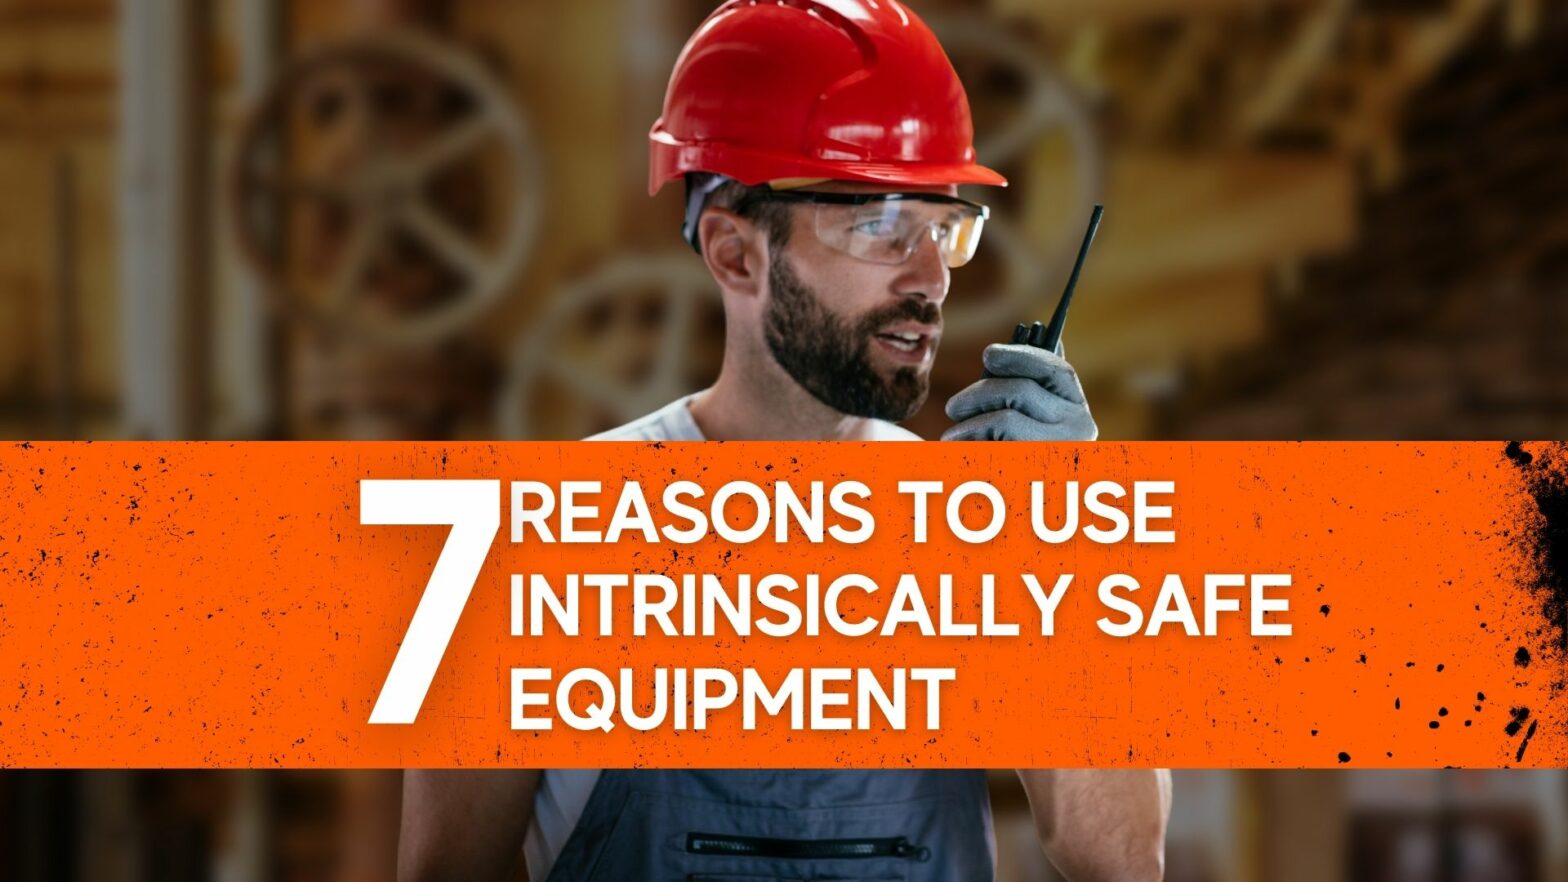 7 Reasons To Use Intrinsically Safe Equipment Why intrinsically safe equipment is required for hazardous areas.